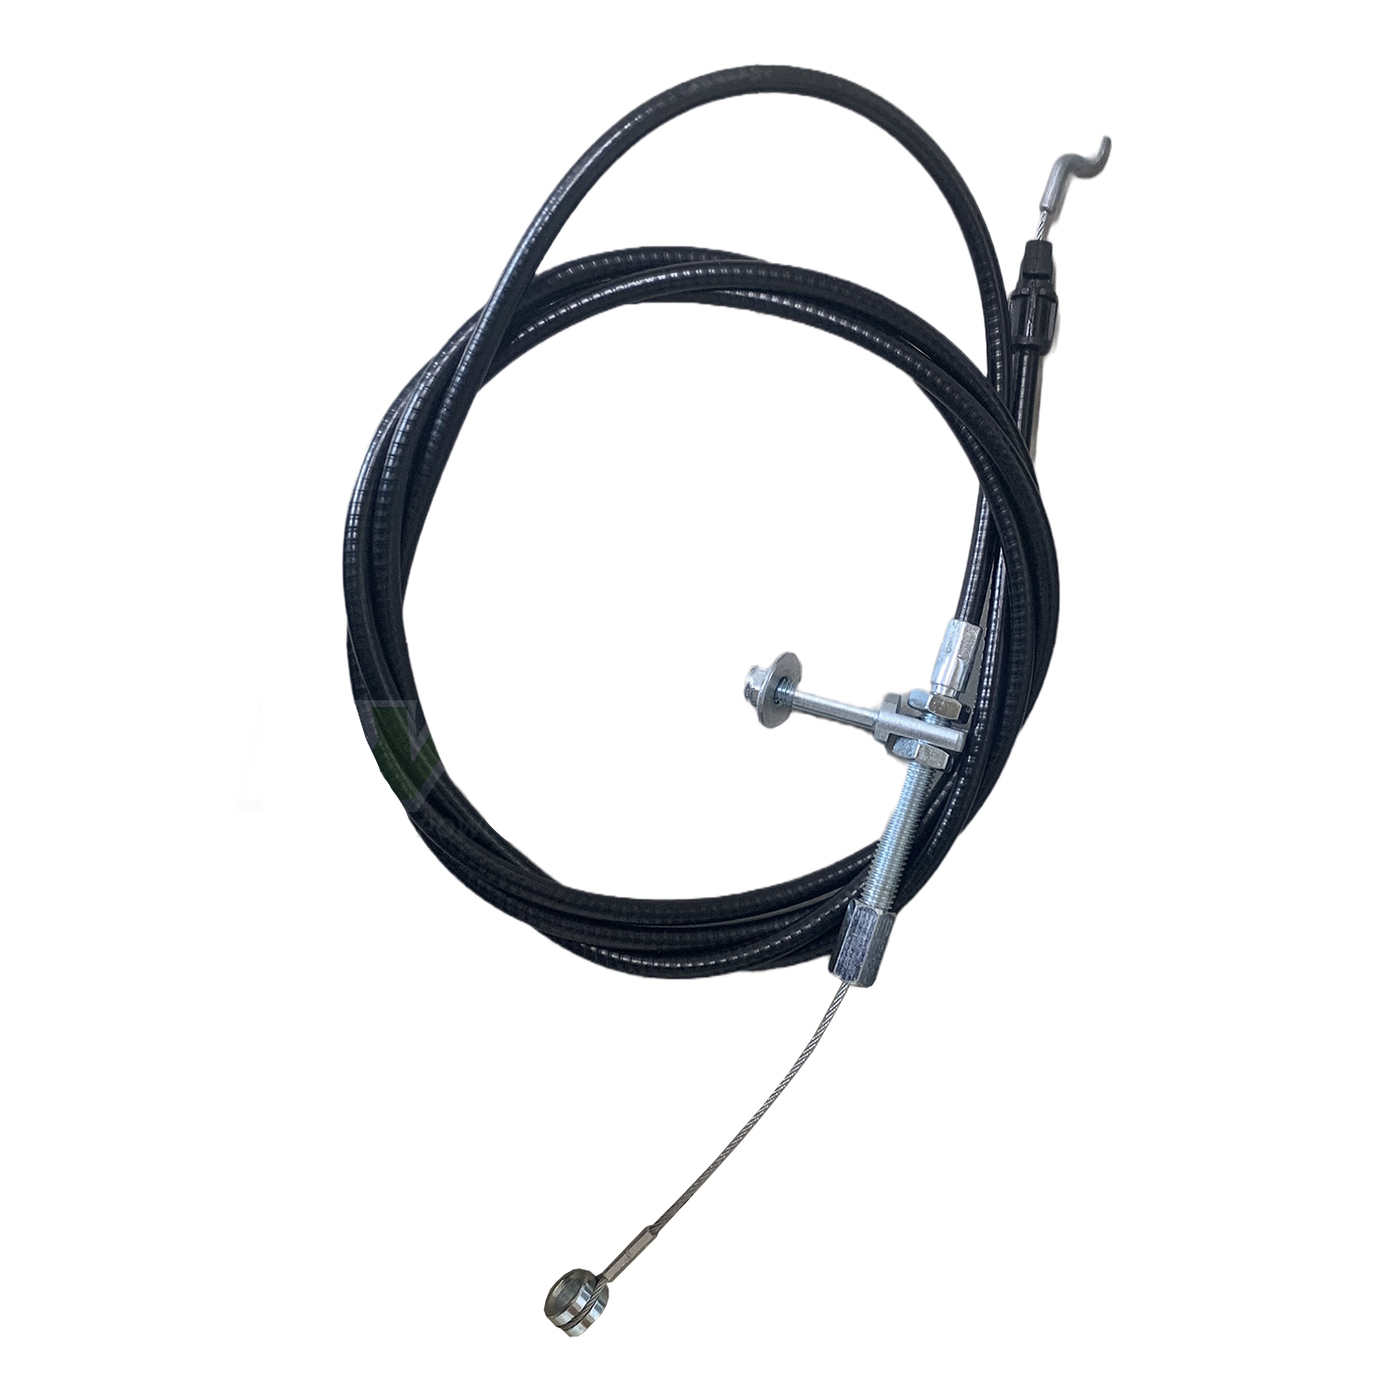 Victa 19" Commercial Self-Propelled Clutch-Cable CH87425A